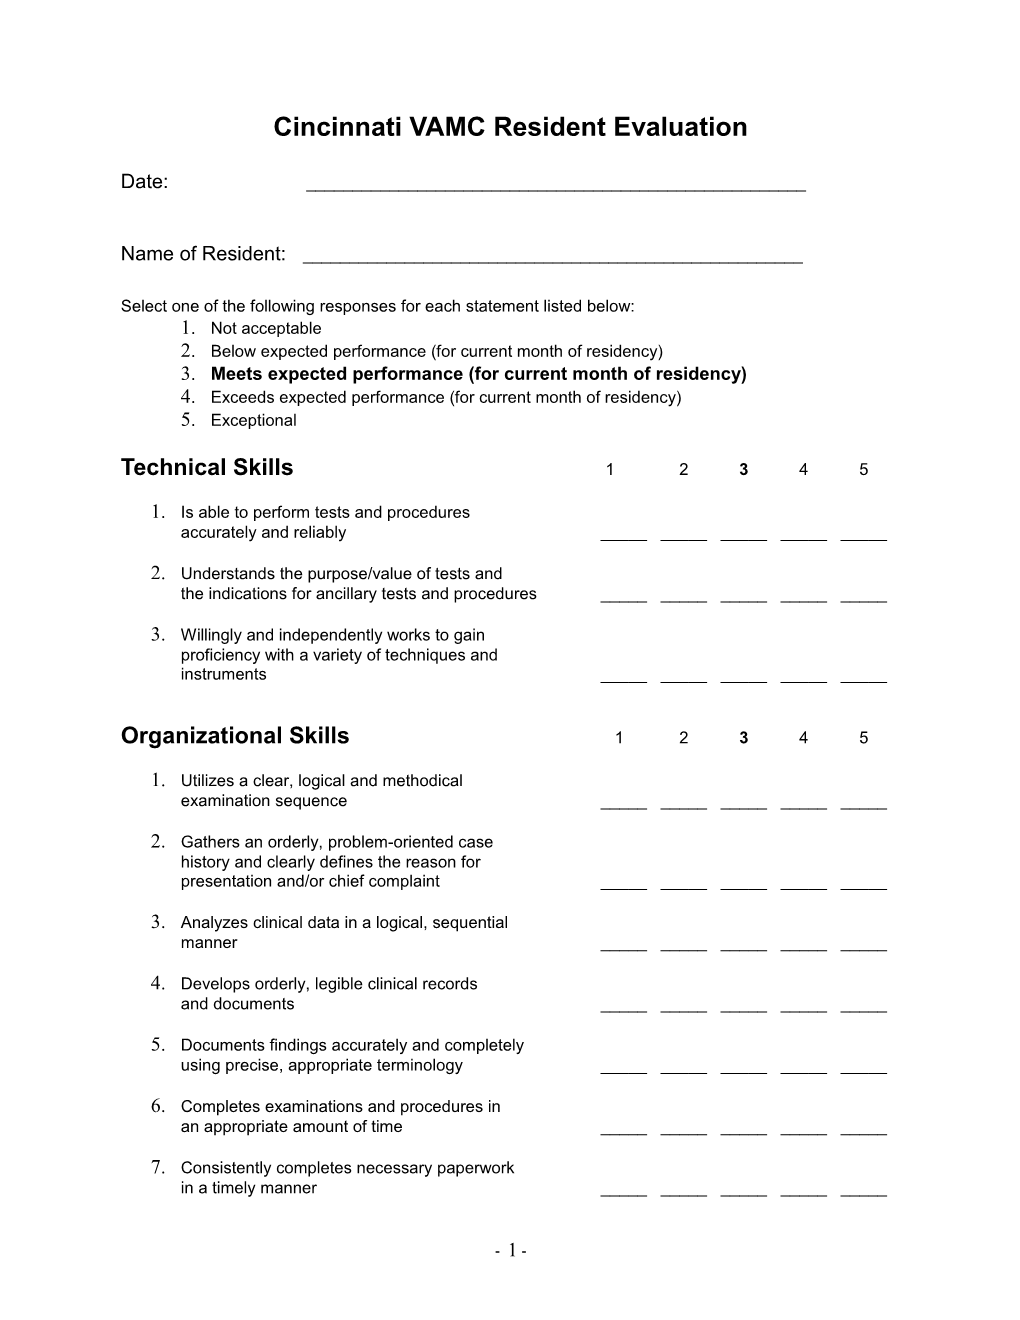 The Ohio State University, College of Optometry Evaluation Form